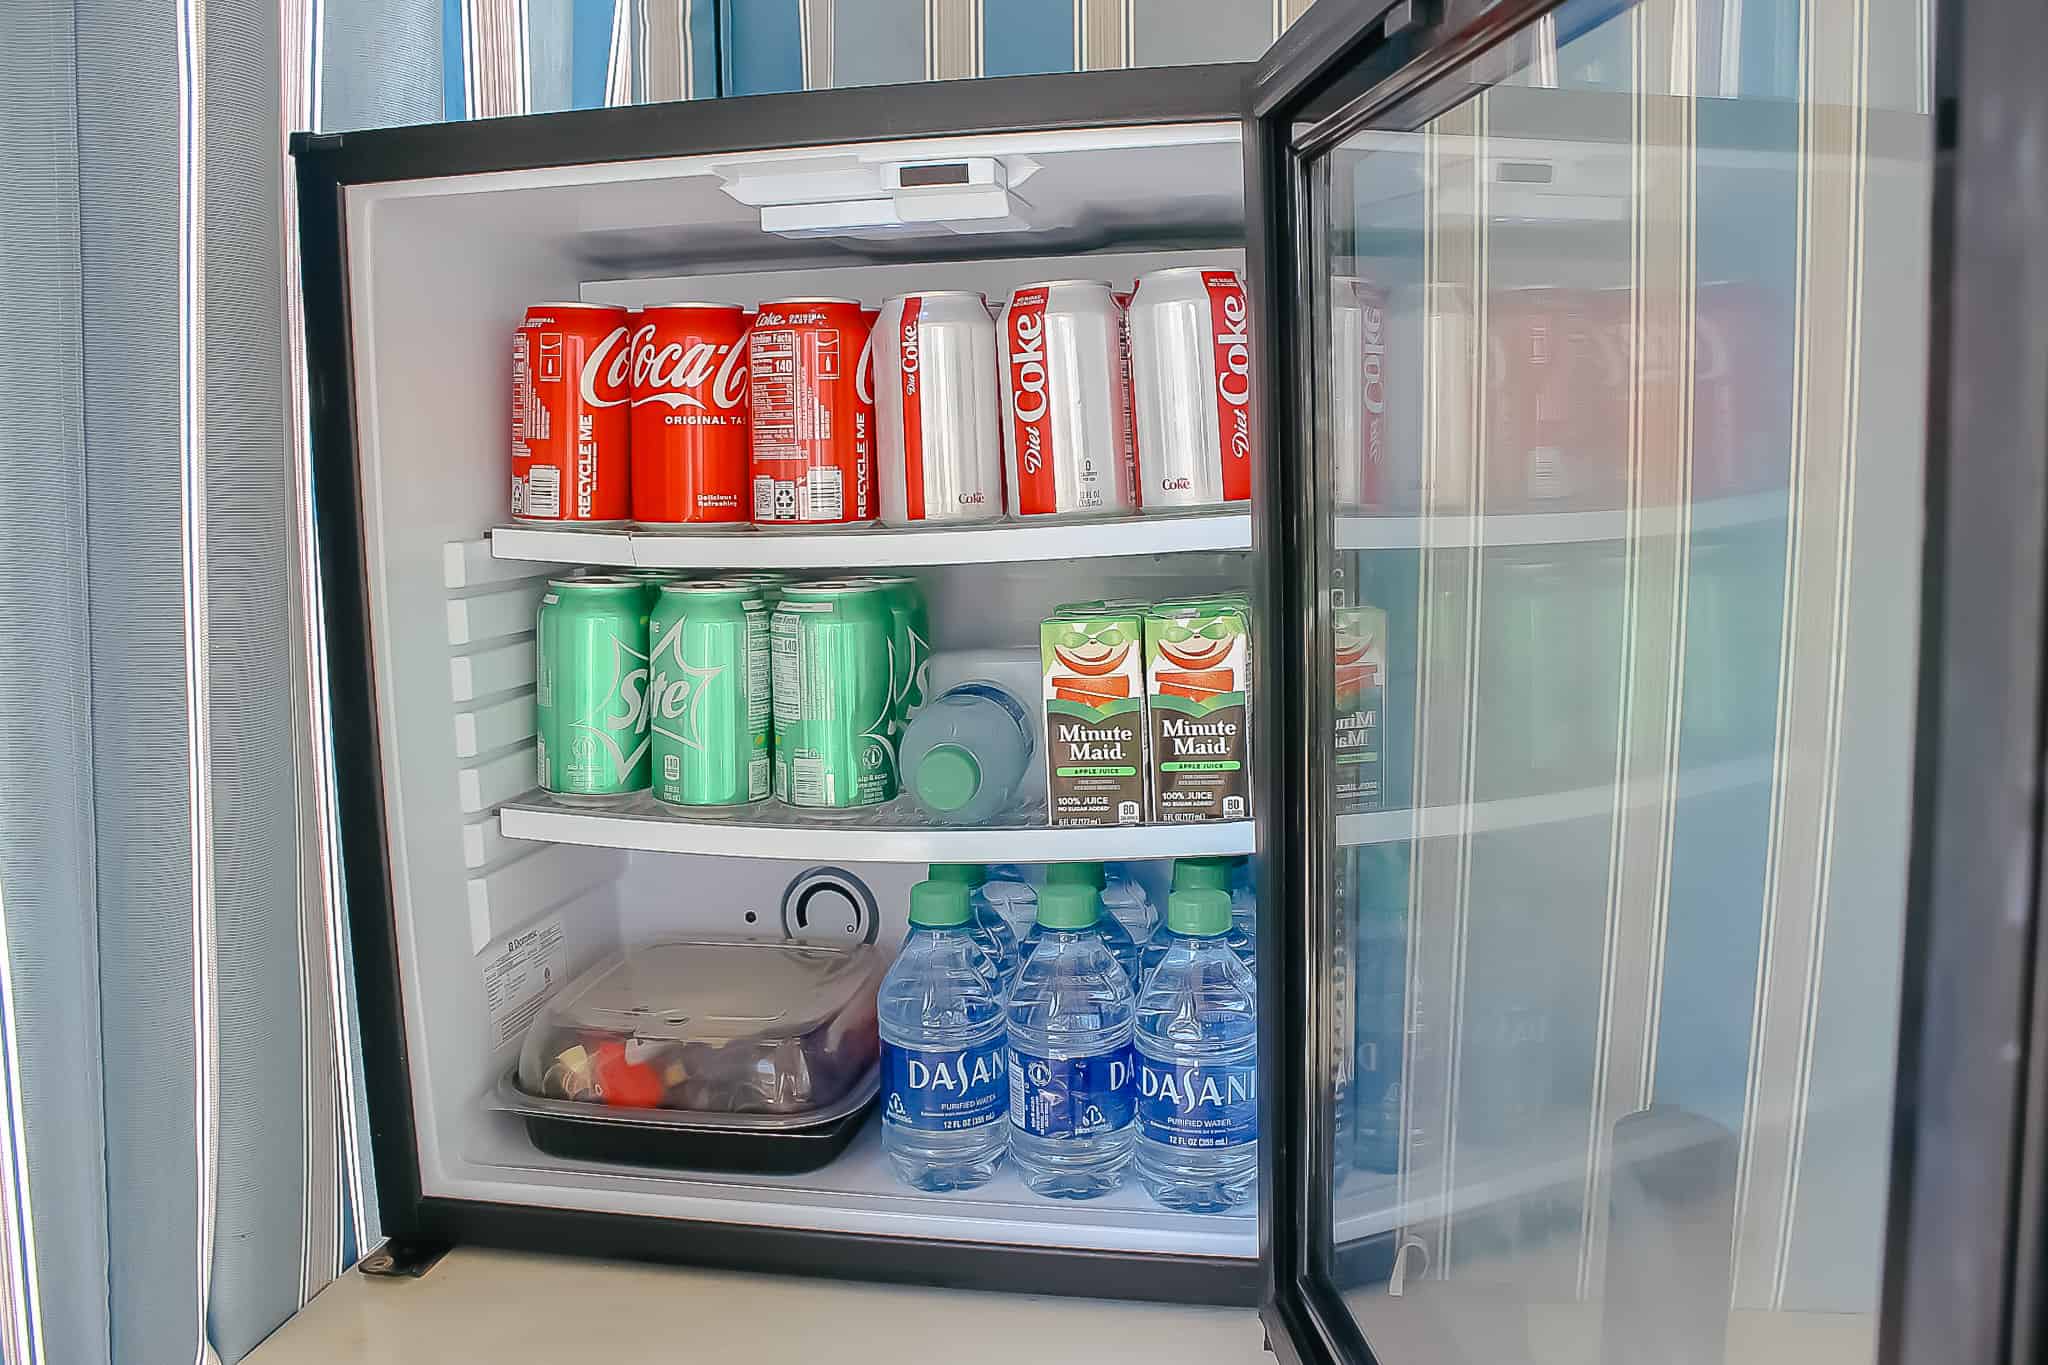 A mini fridge at the Stormalong Bay Cabana stocked with sodas, juice, water, and fruit. 